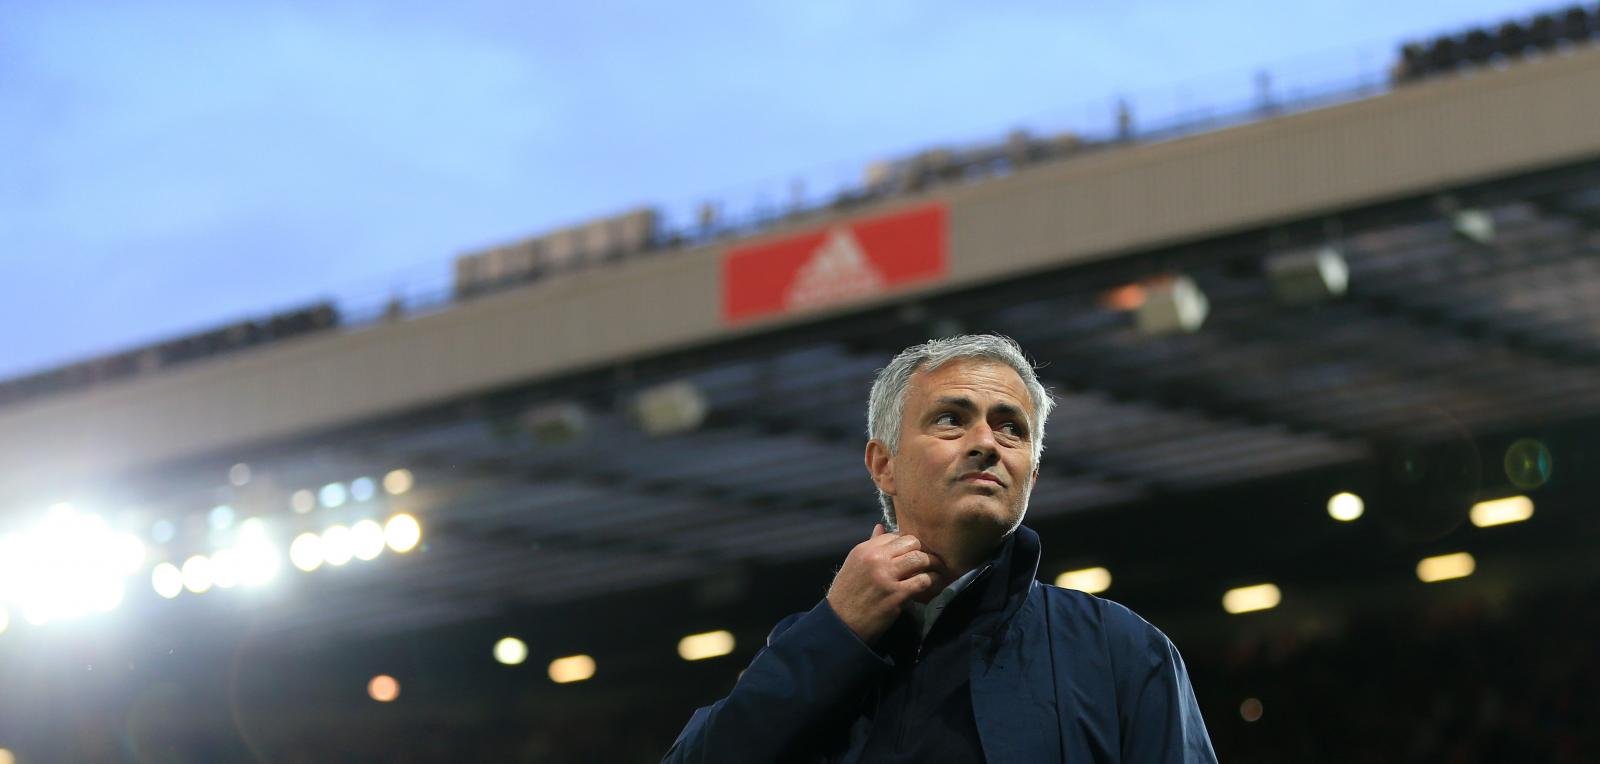 “My dream is to play for Man United” player sends Mourinho stark message